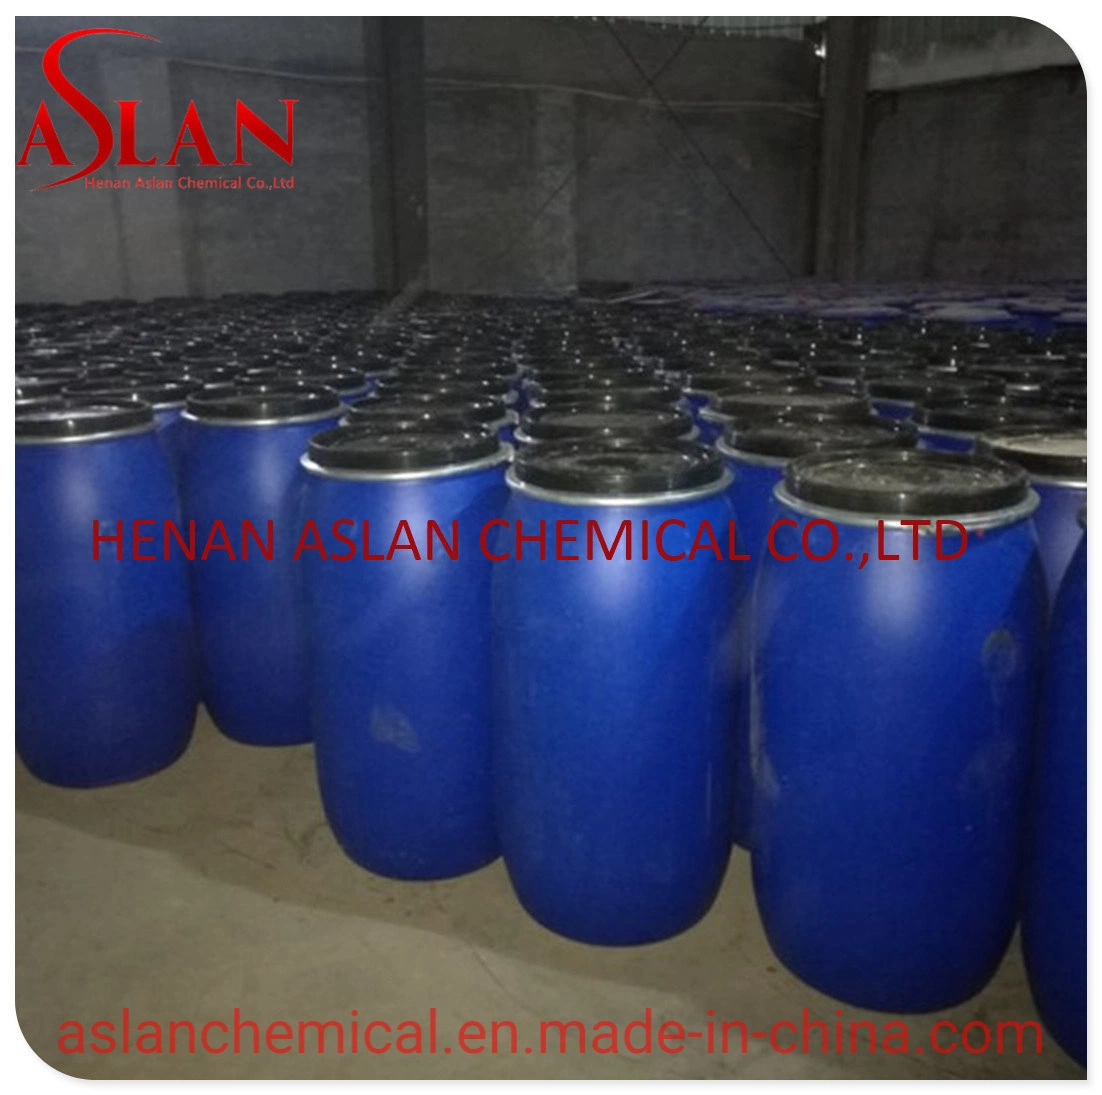 CAS 68891-38-3//Sodium Laureth Sulfate//2eo Anionic Surfactant SLES 70% Packaged in 170kgs Drums CAS 68585-34-2 / 68891-38-3 / 9004-82-4